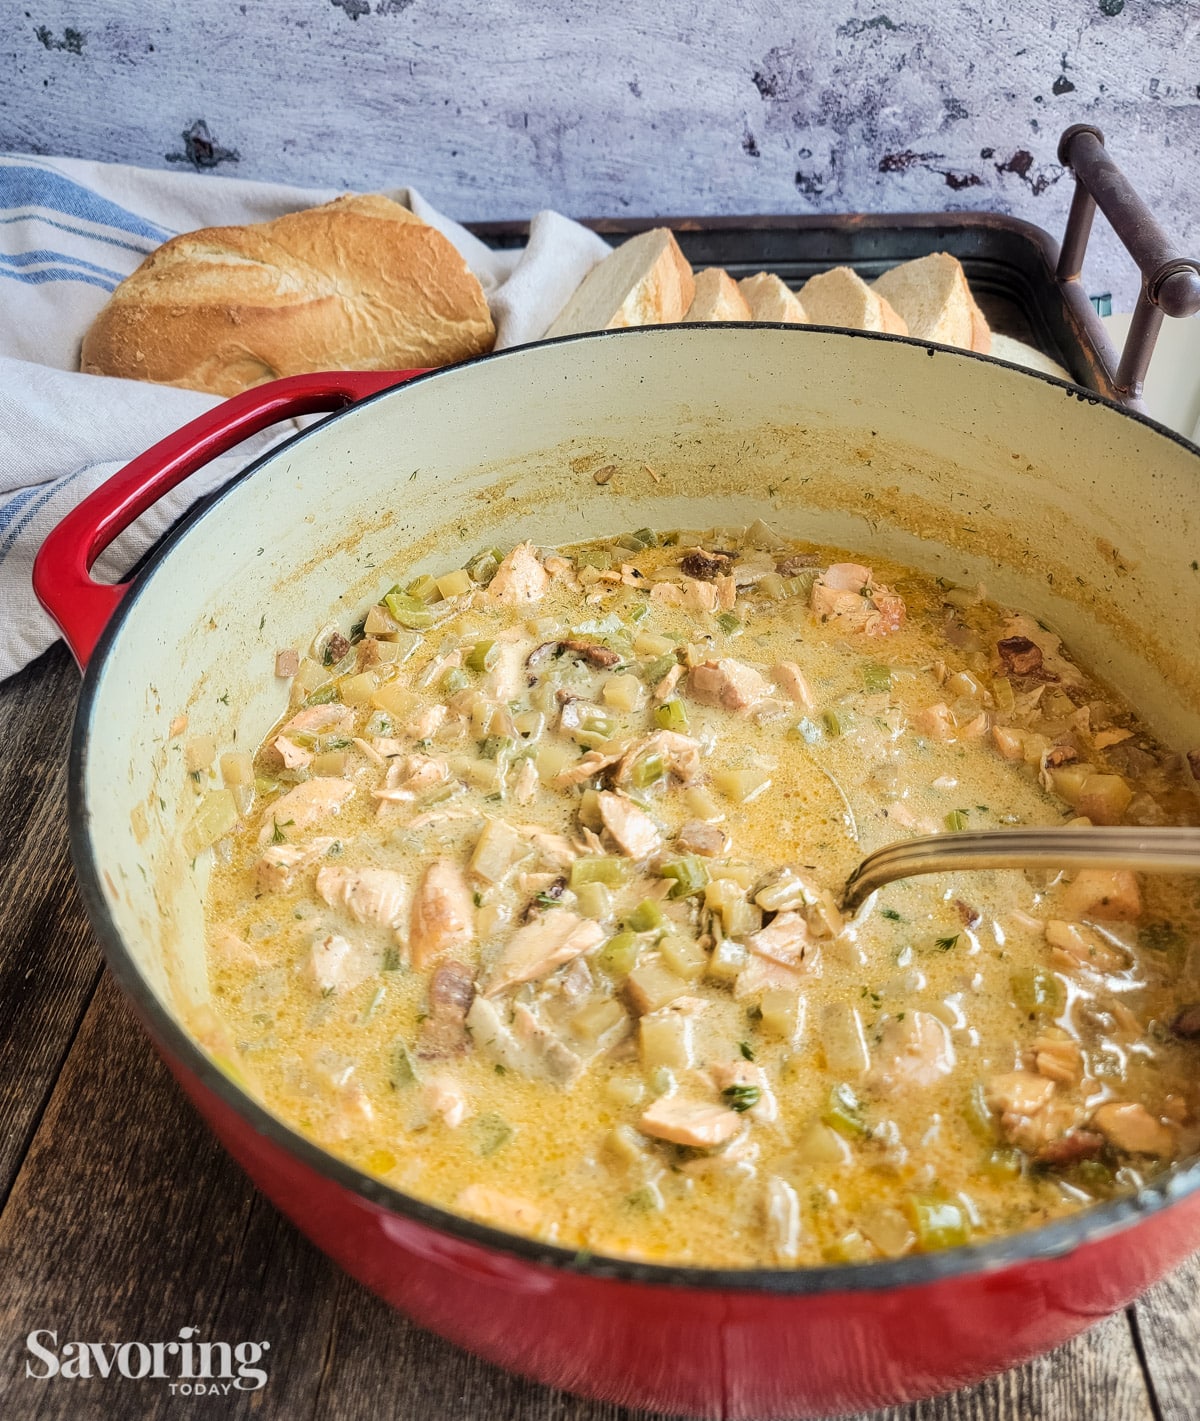 Salmon dill chowder in red pot with bread